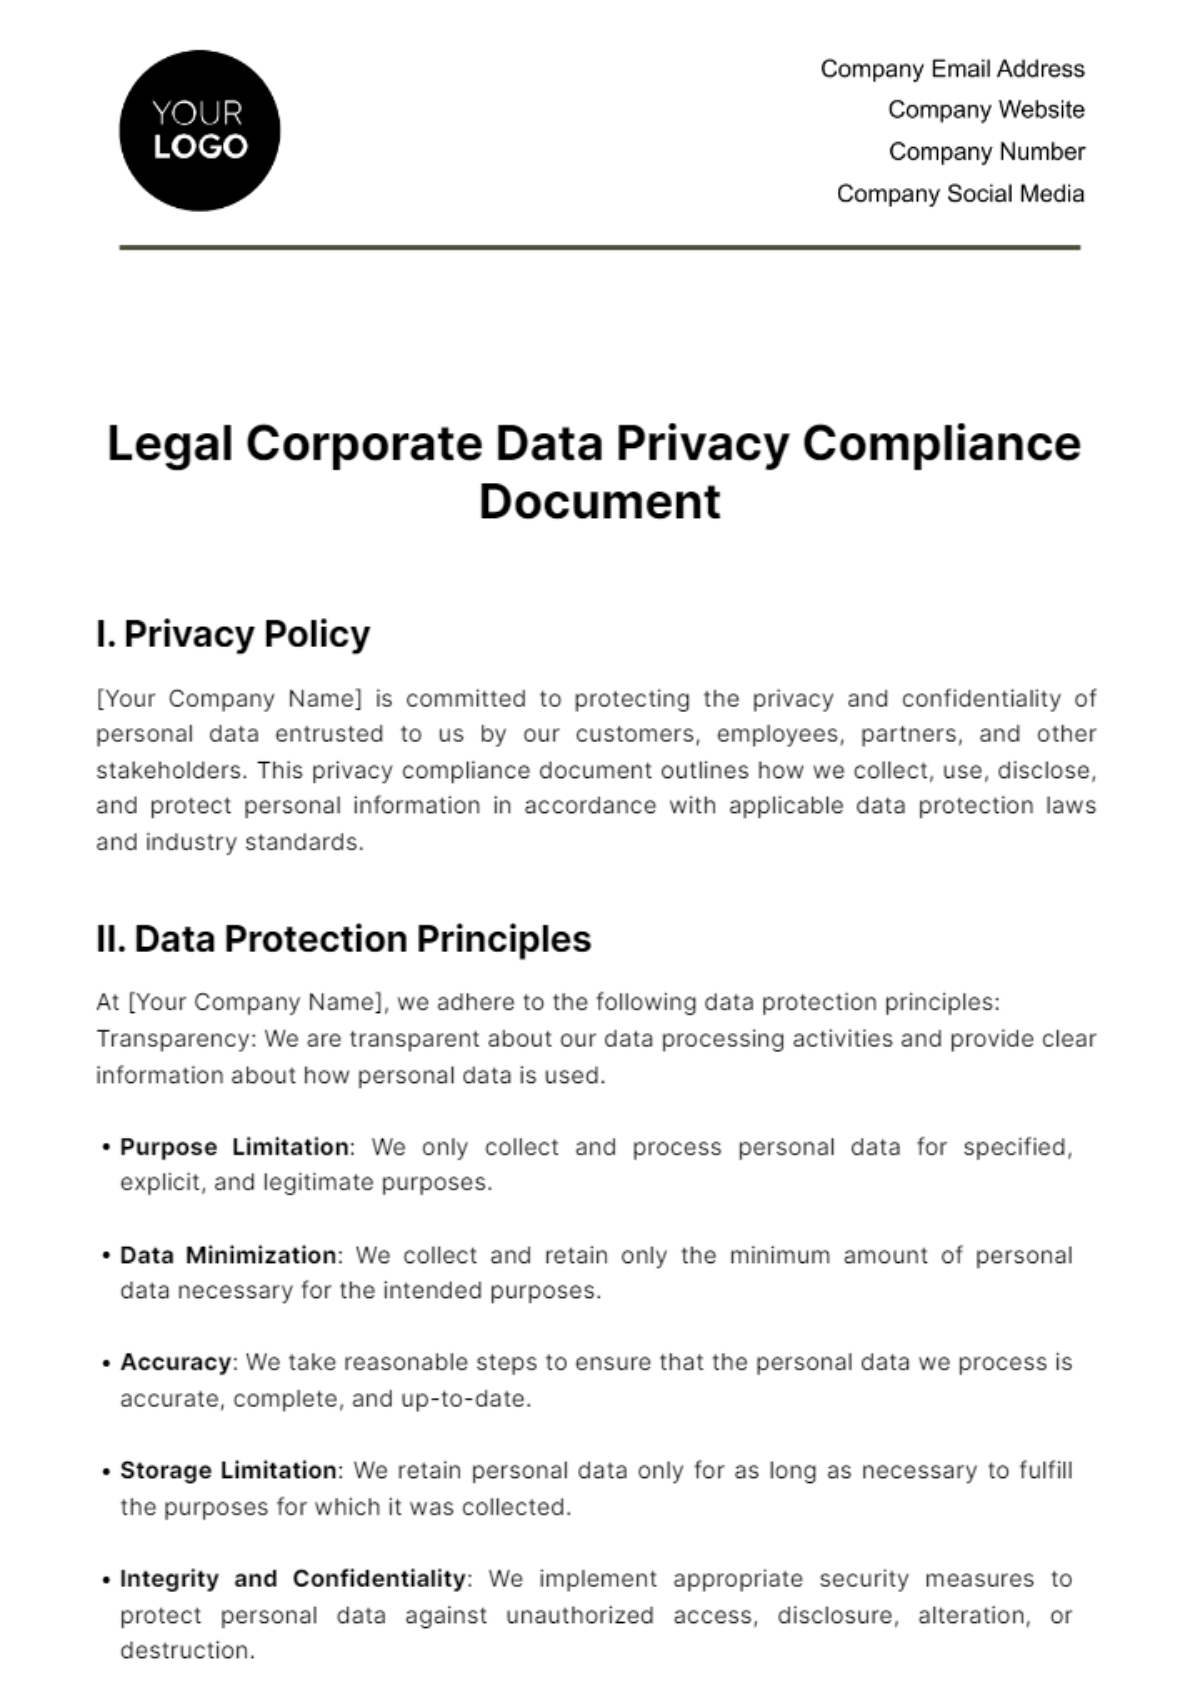 Legal Corporate Data Privacy Compliance Document Template